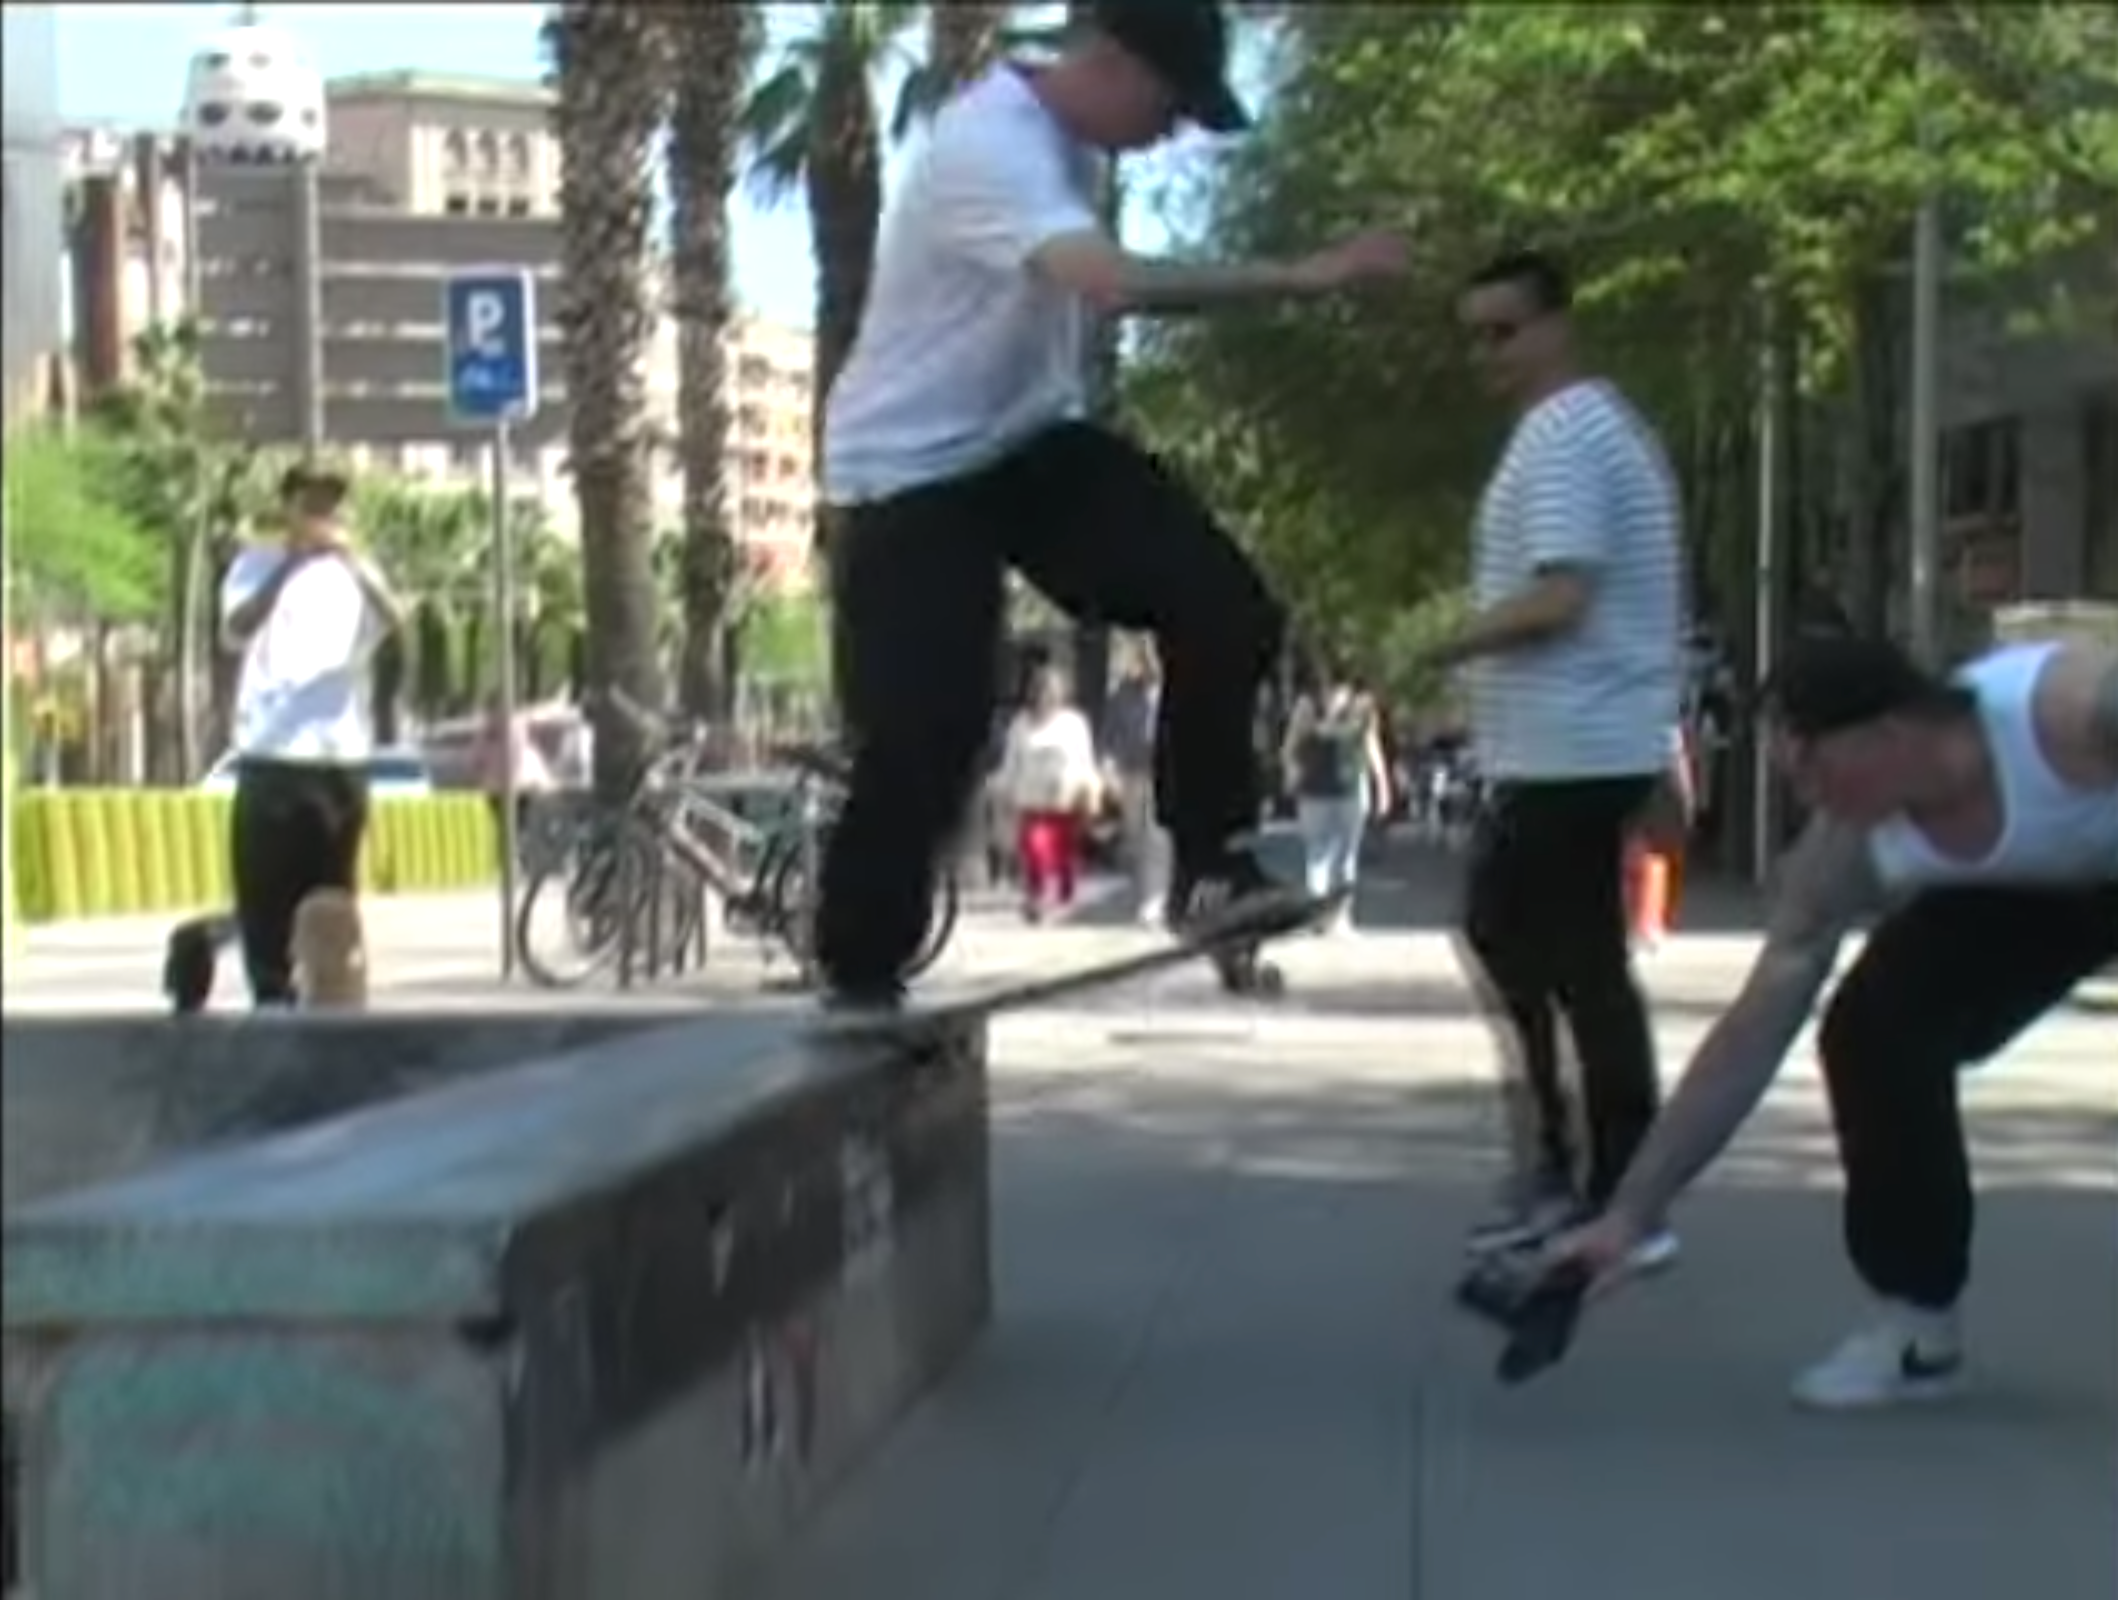 Coffee Shop Then Paral-lel? | Charlie Arlett and the Ledge Lords in BCN